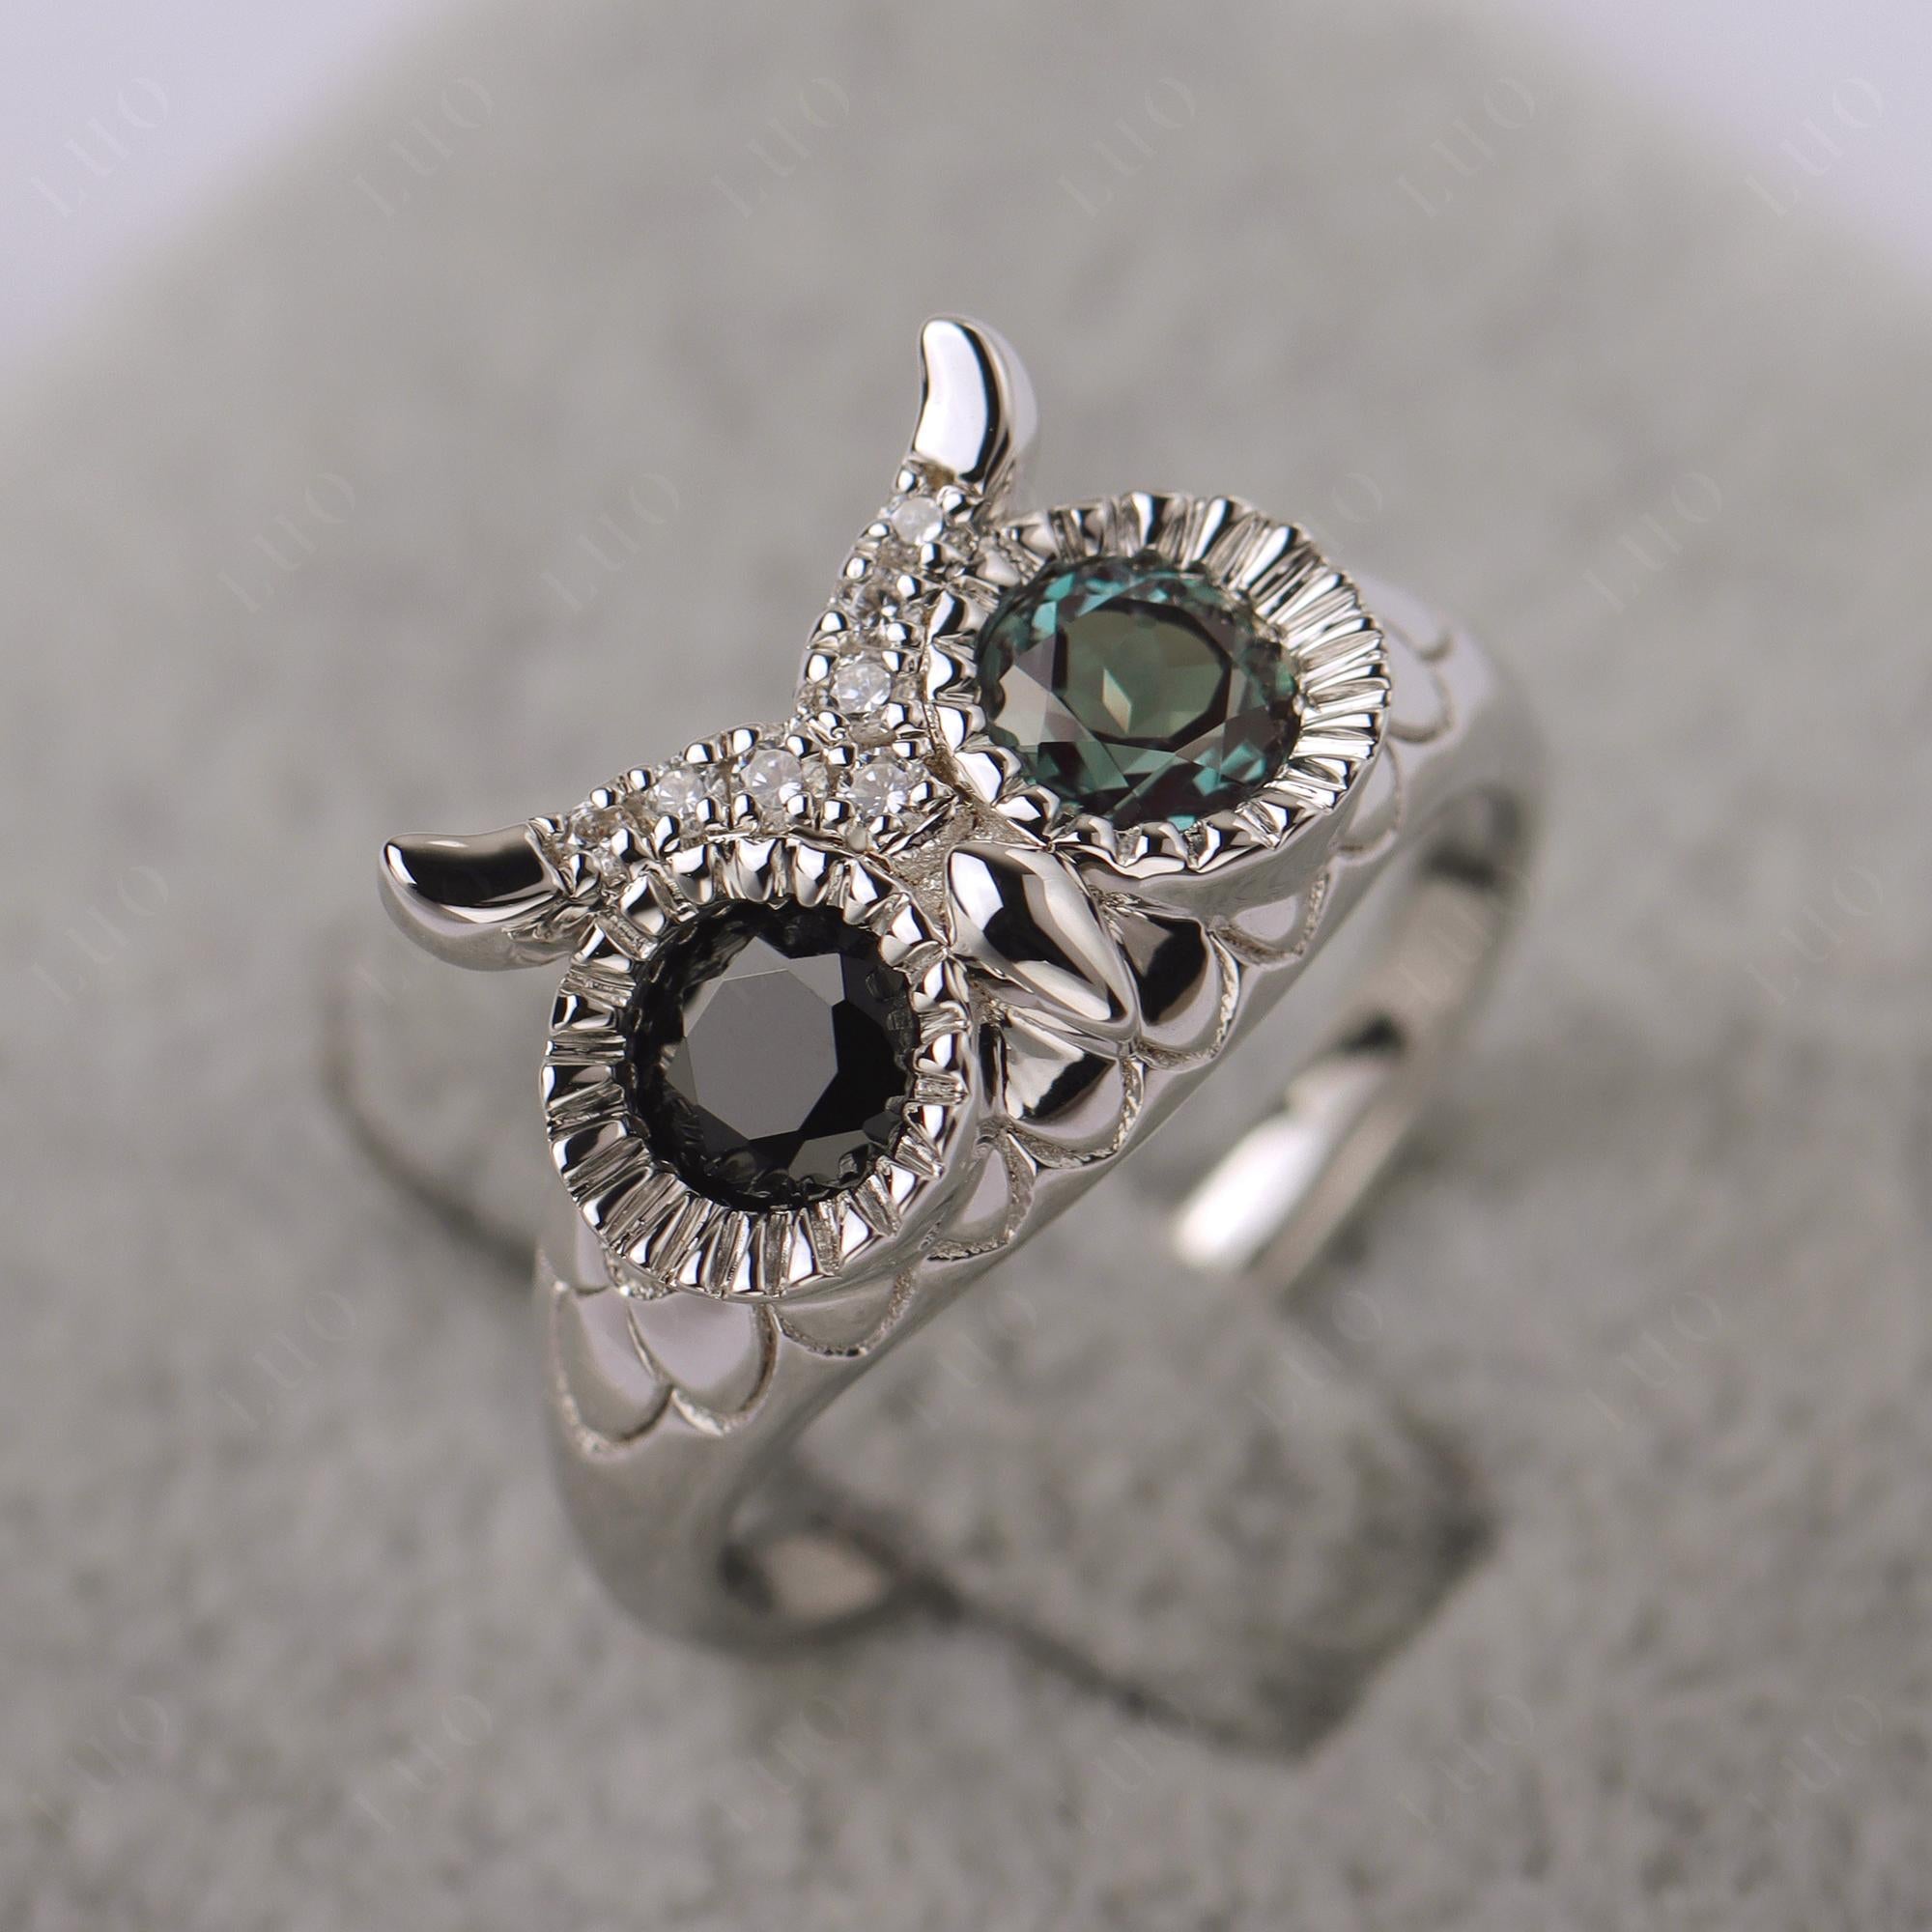 Owl Ring Silver Engagement | Sterling Silver Owl Rings | 925 Silver Rings  Owl Ring - 925 - Aliexpress